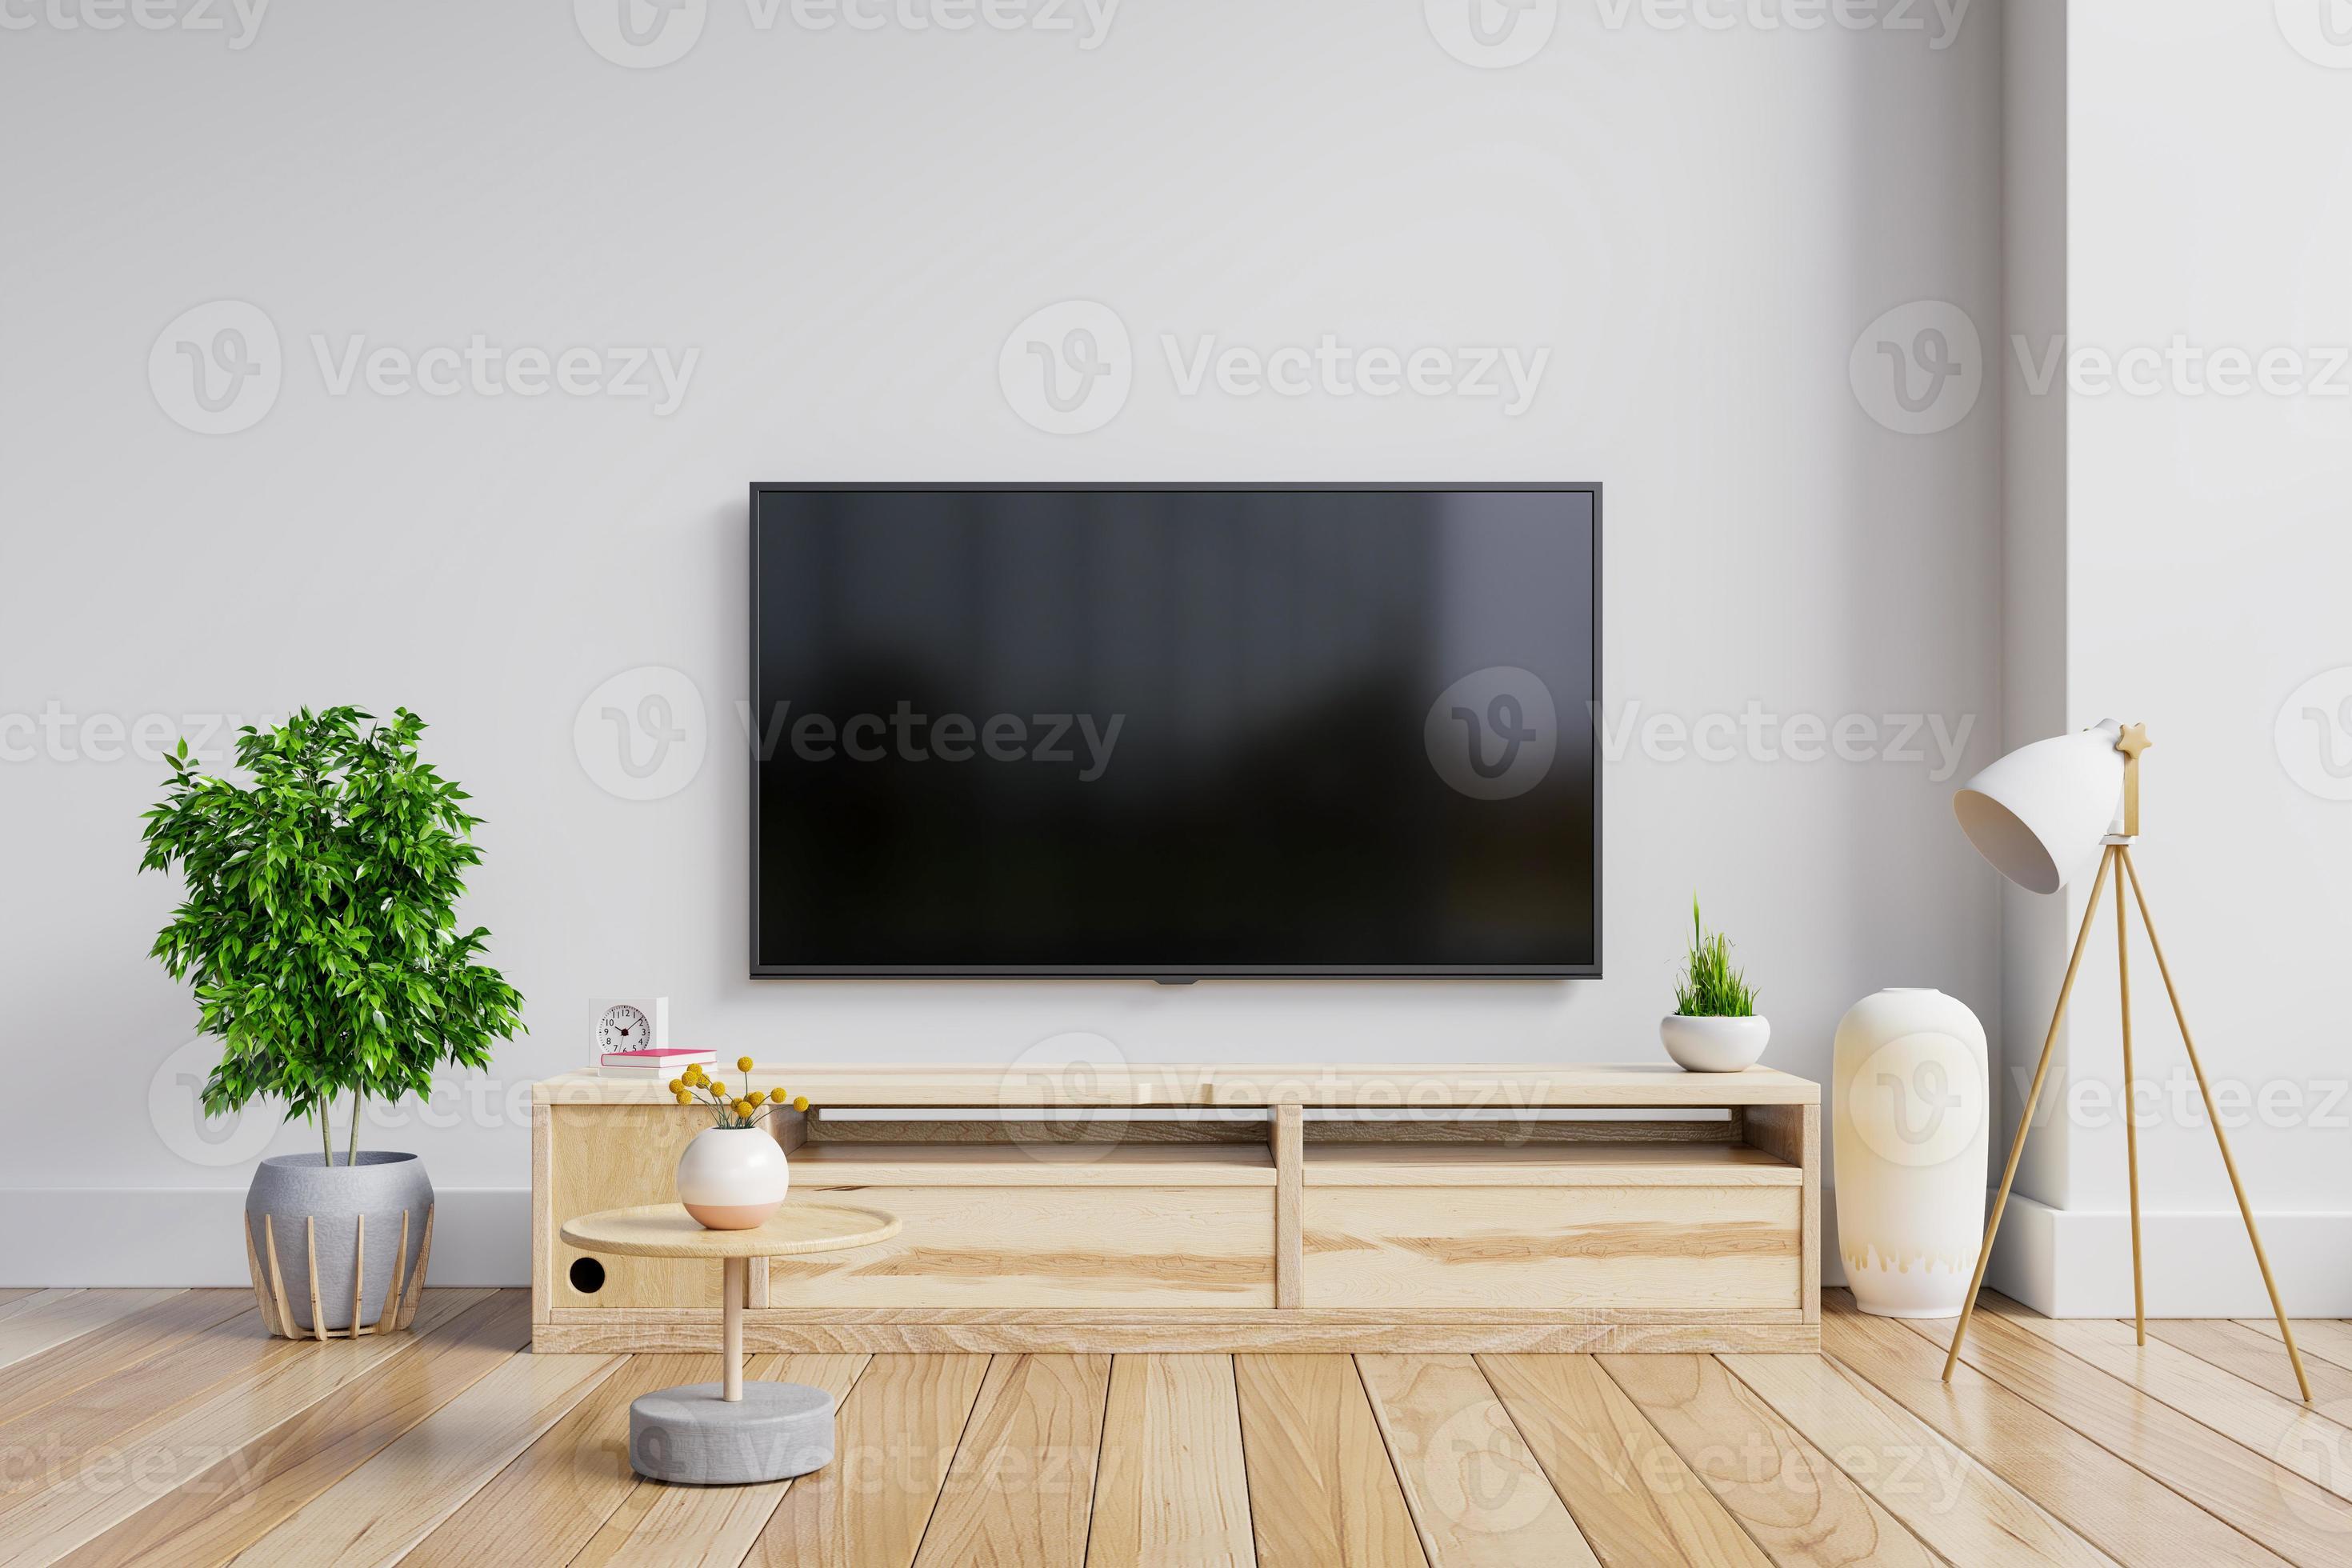 LED TV on the cabinet in modern living room on white wall background.  7334323 Stock Photo at Vecteezy